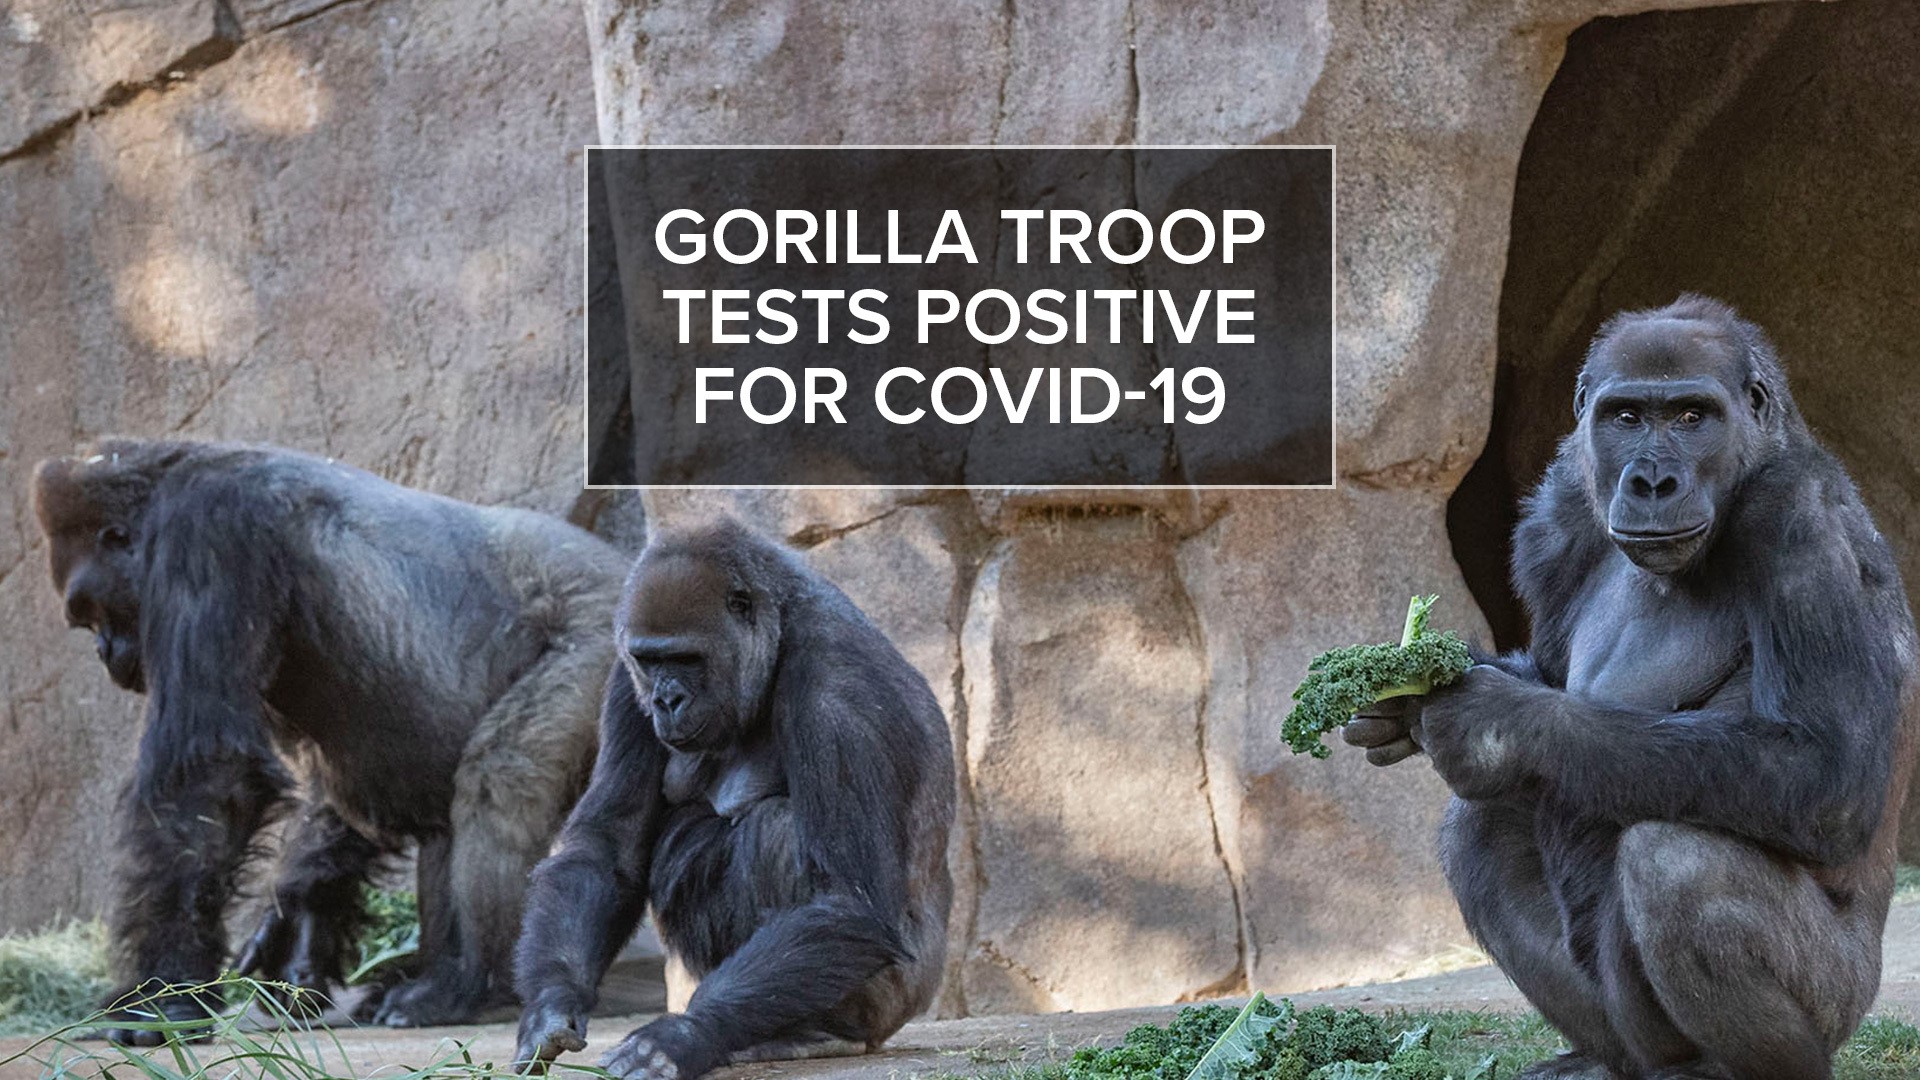 On Jan. 8, Zoo officials said the preliminary tests detected the presence of the virus in the gorilla troop.